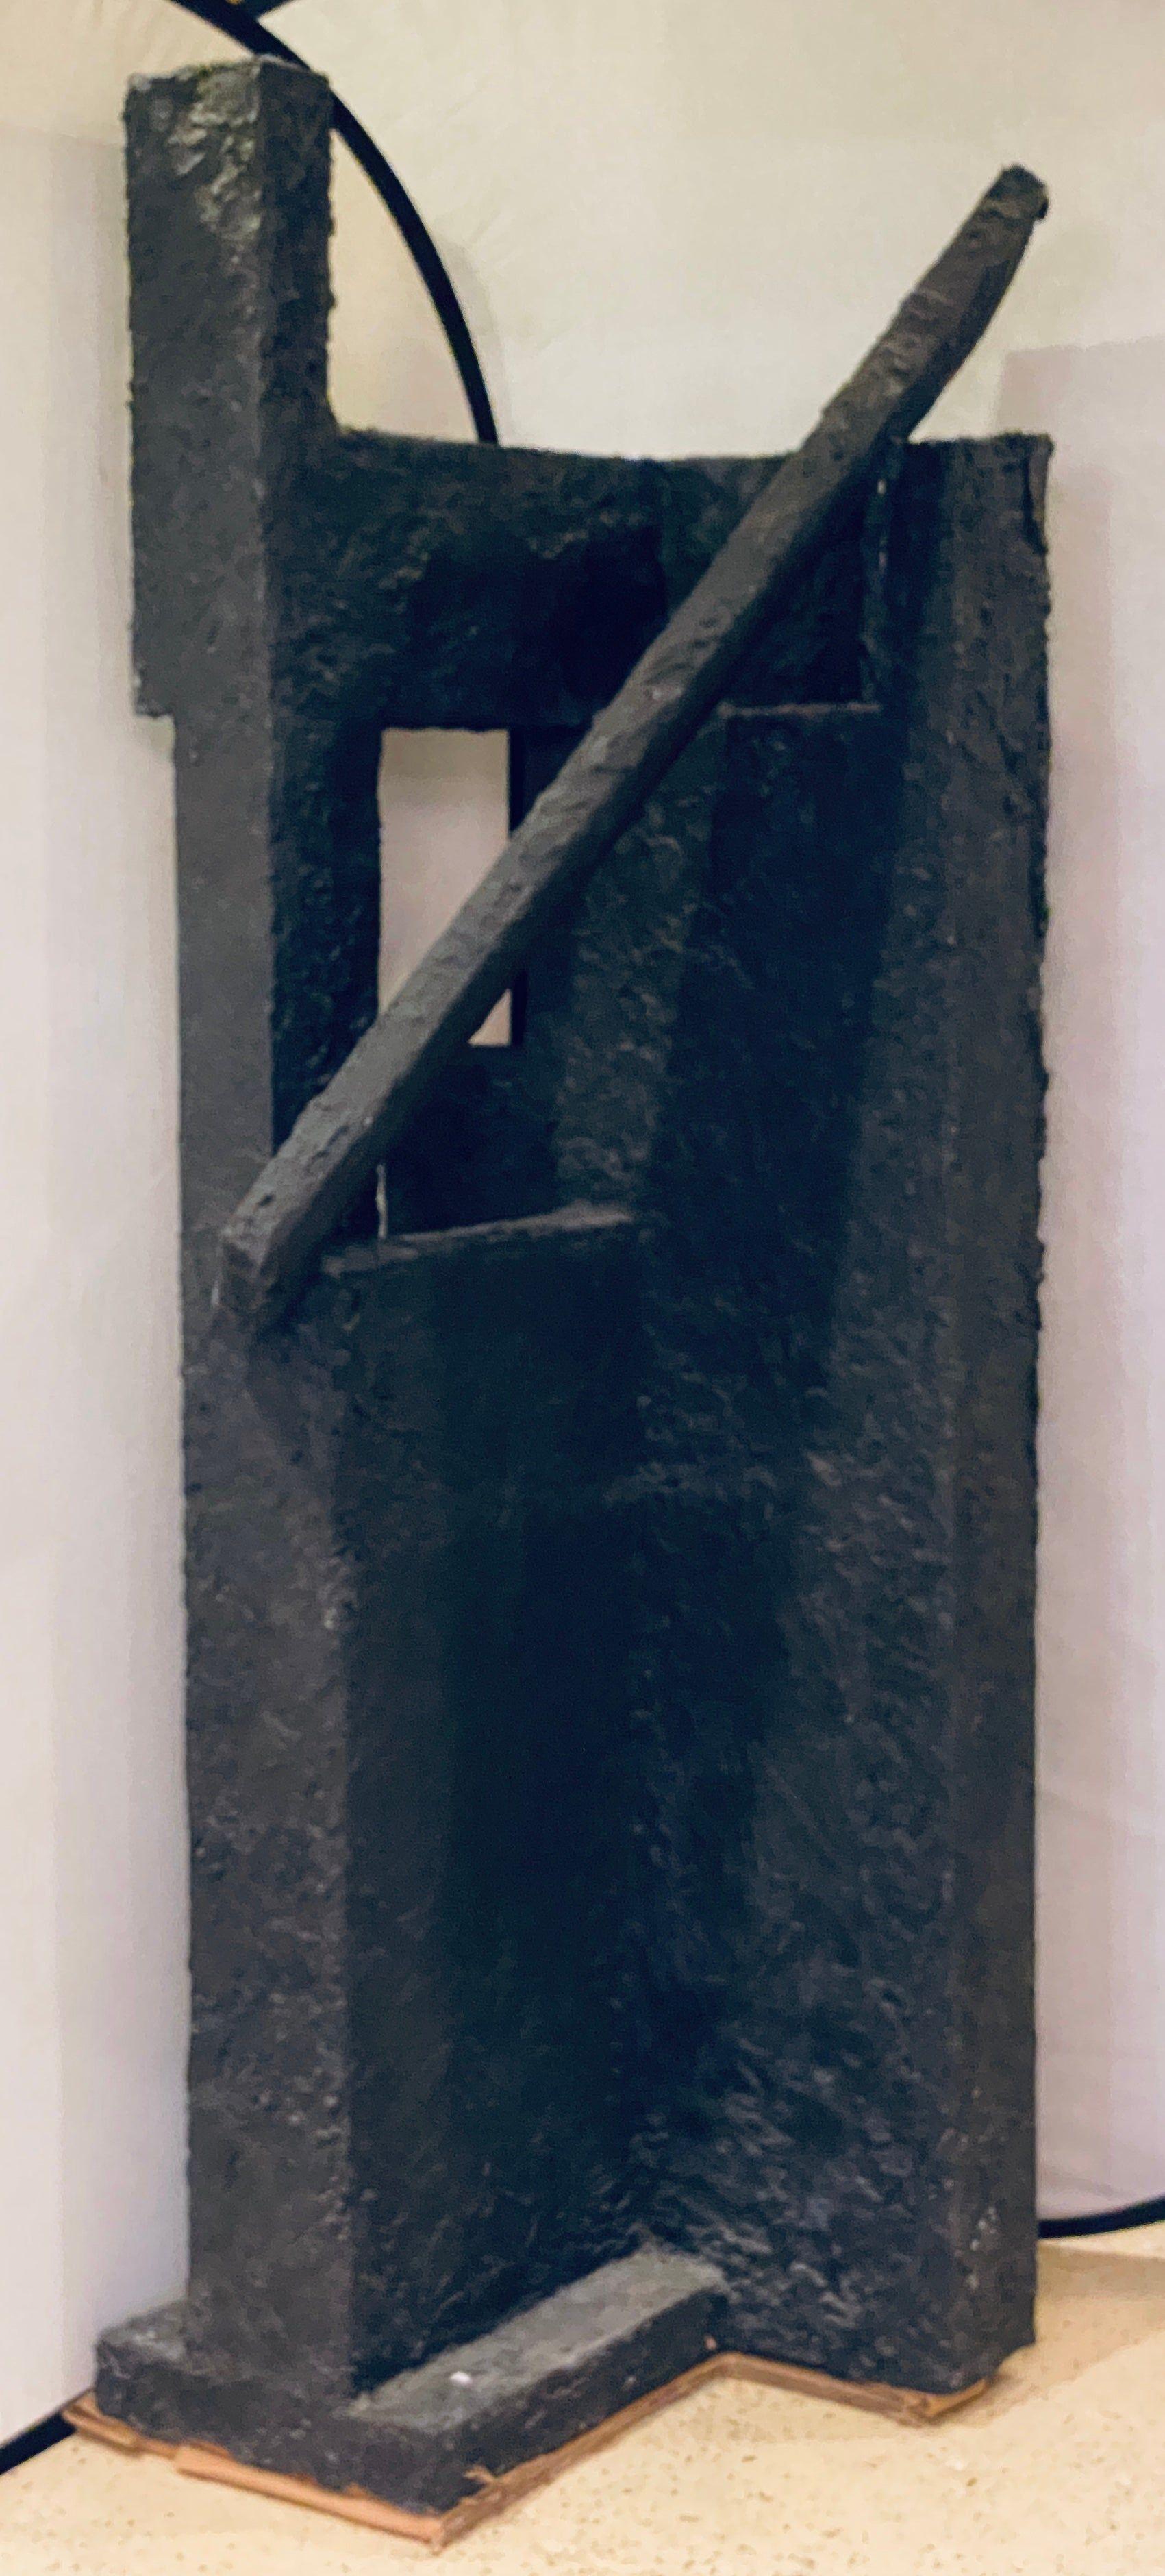 Black geometric sculpture by Ursula Meyers conceptual Artist.
Ursula Meyer (1915-2003) American sculpture signed and dated. This monumental geometric form sculpture is one the first work of art ever offered for sale, only at Greenwich Living, by